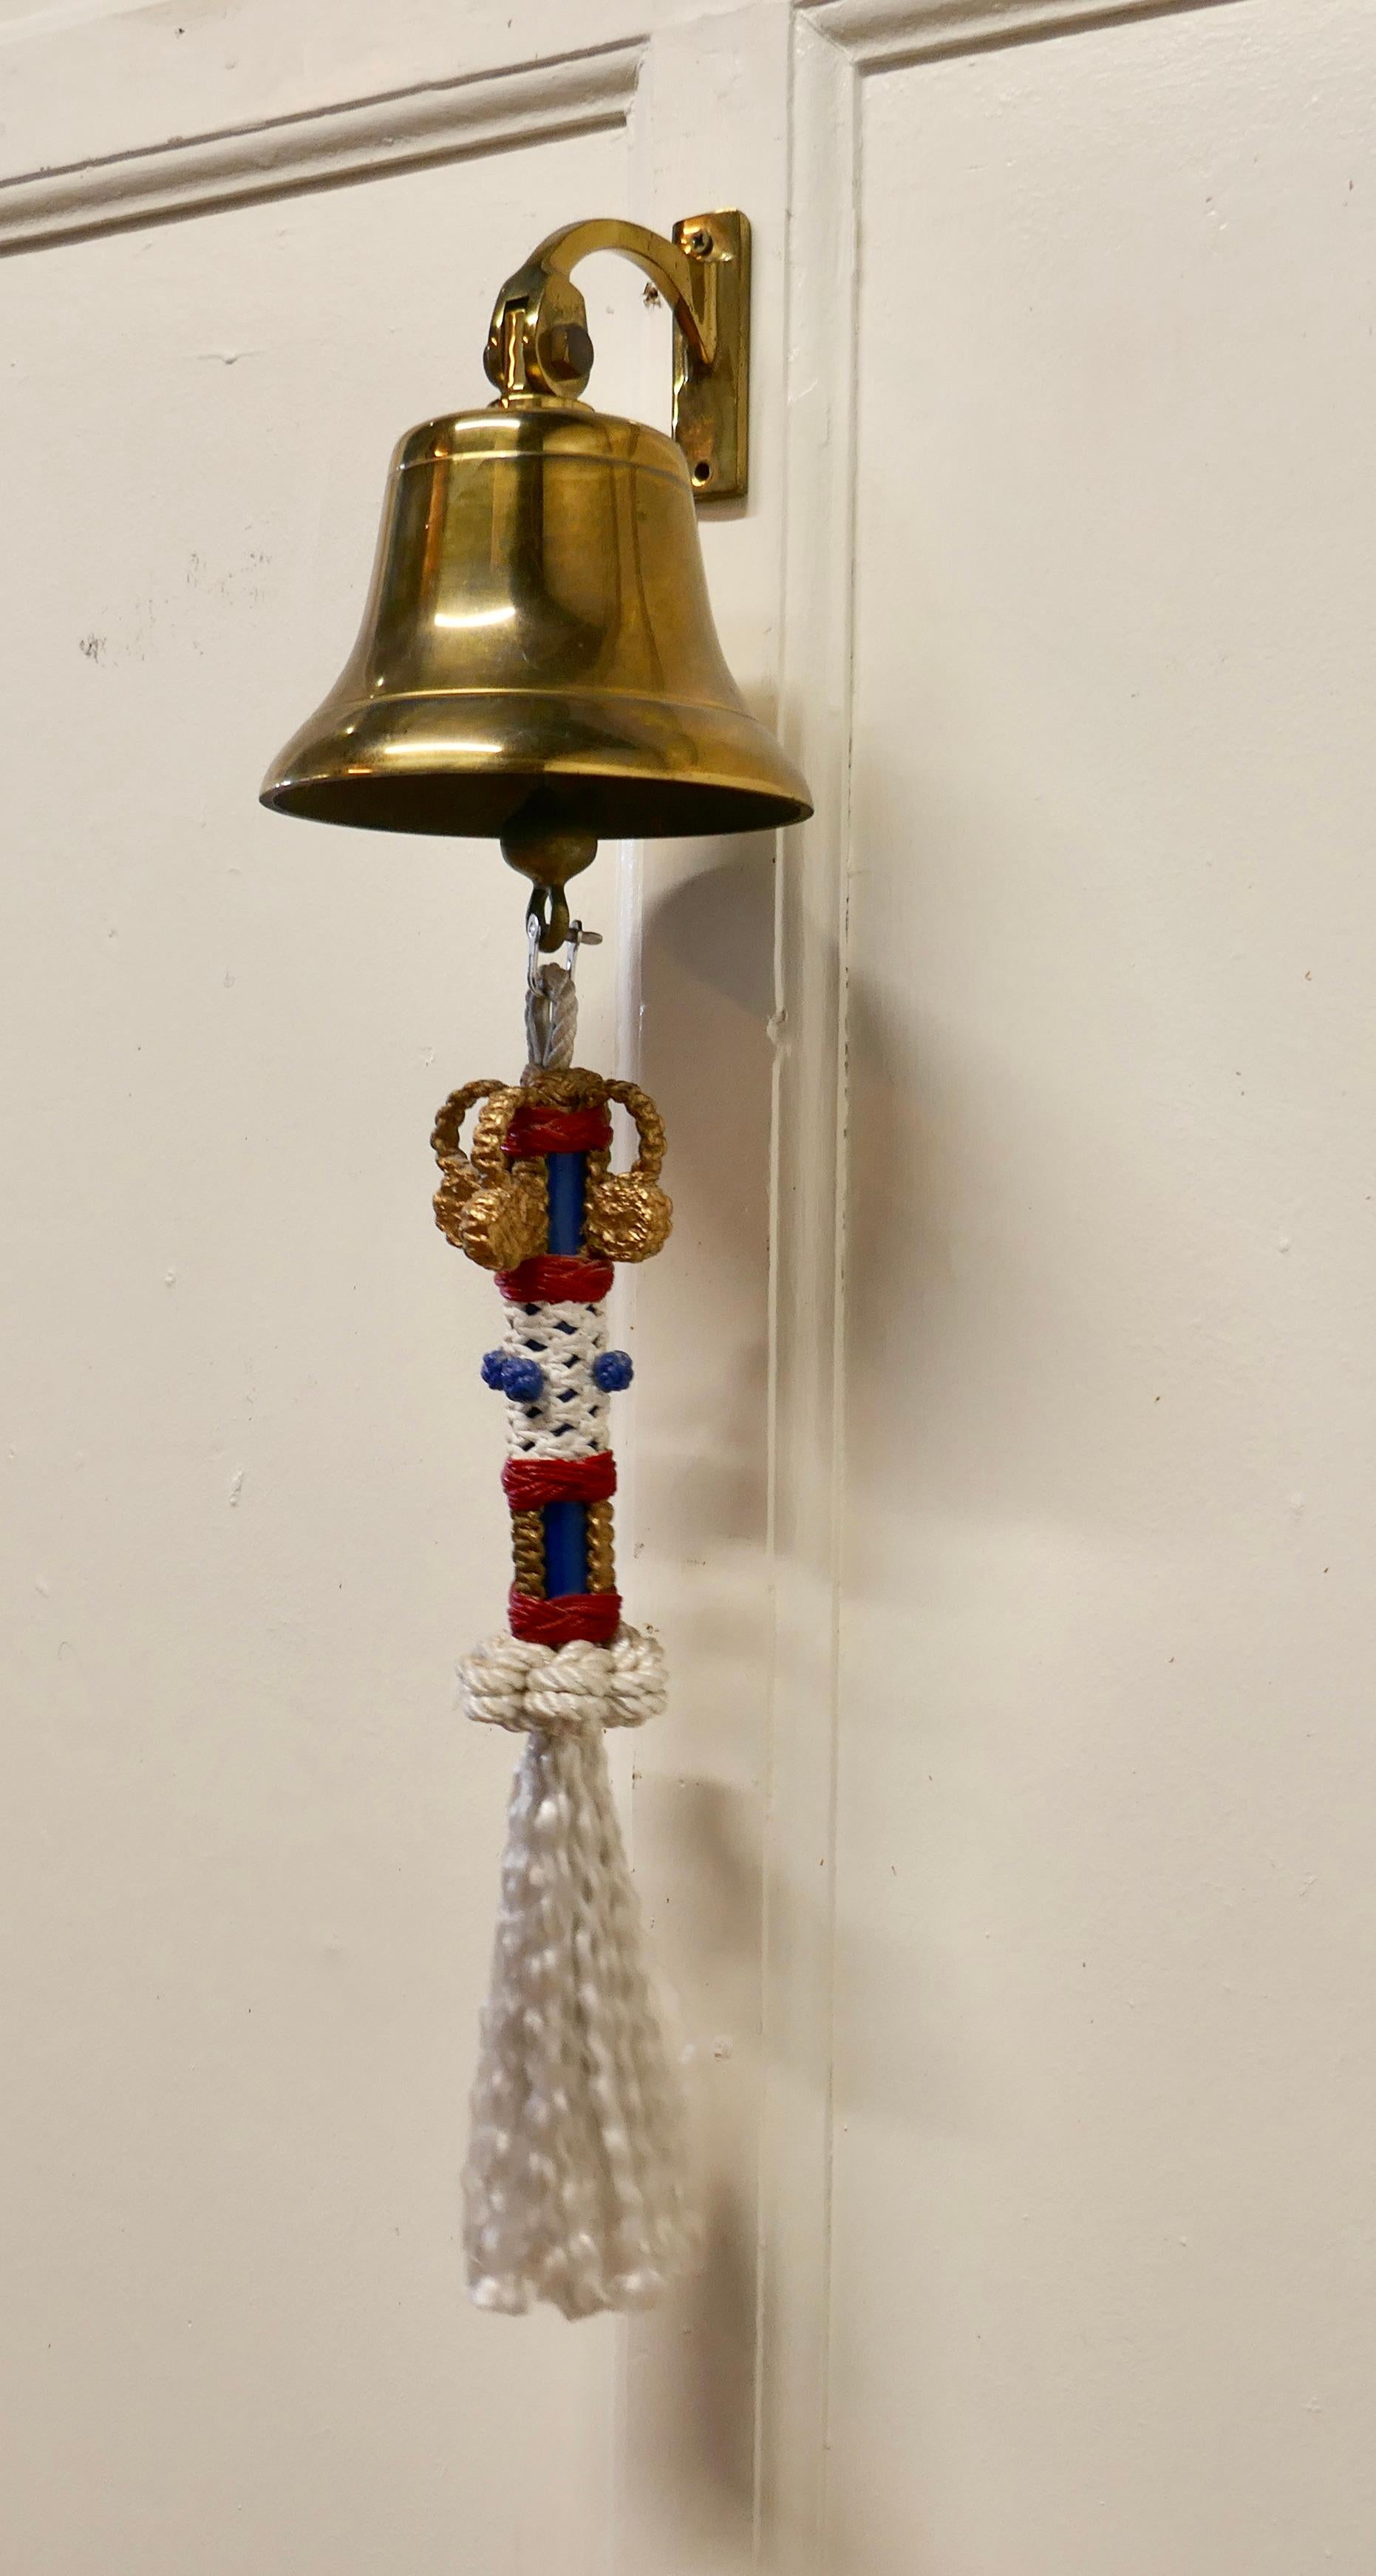 British Colonial Brass Ships Bell with Royal Naval Bell Rope